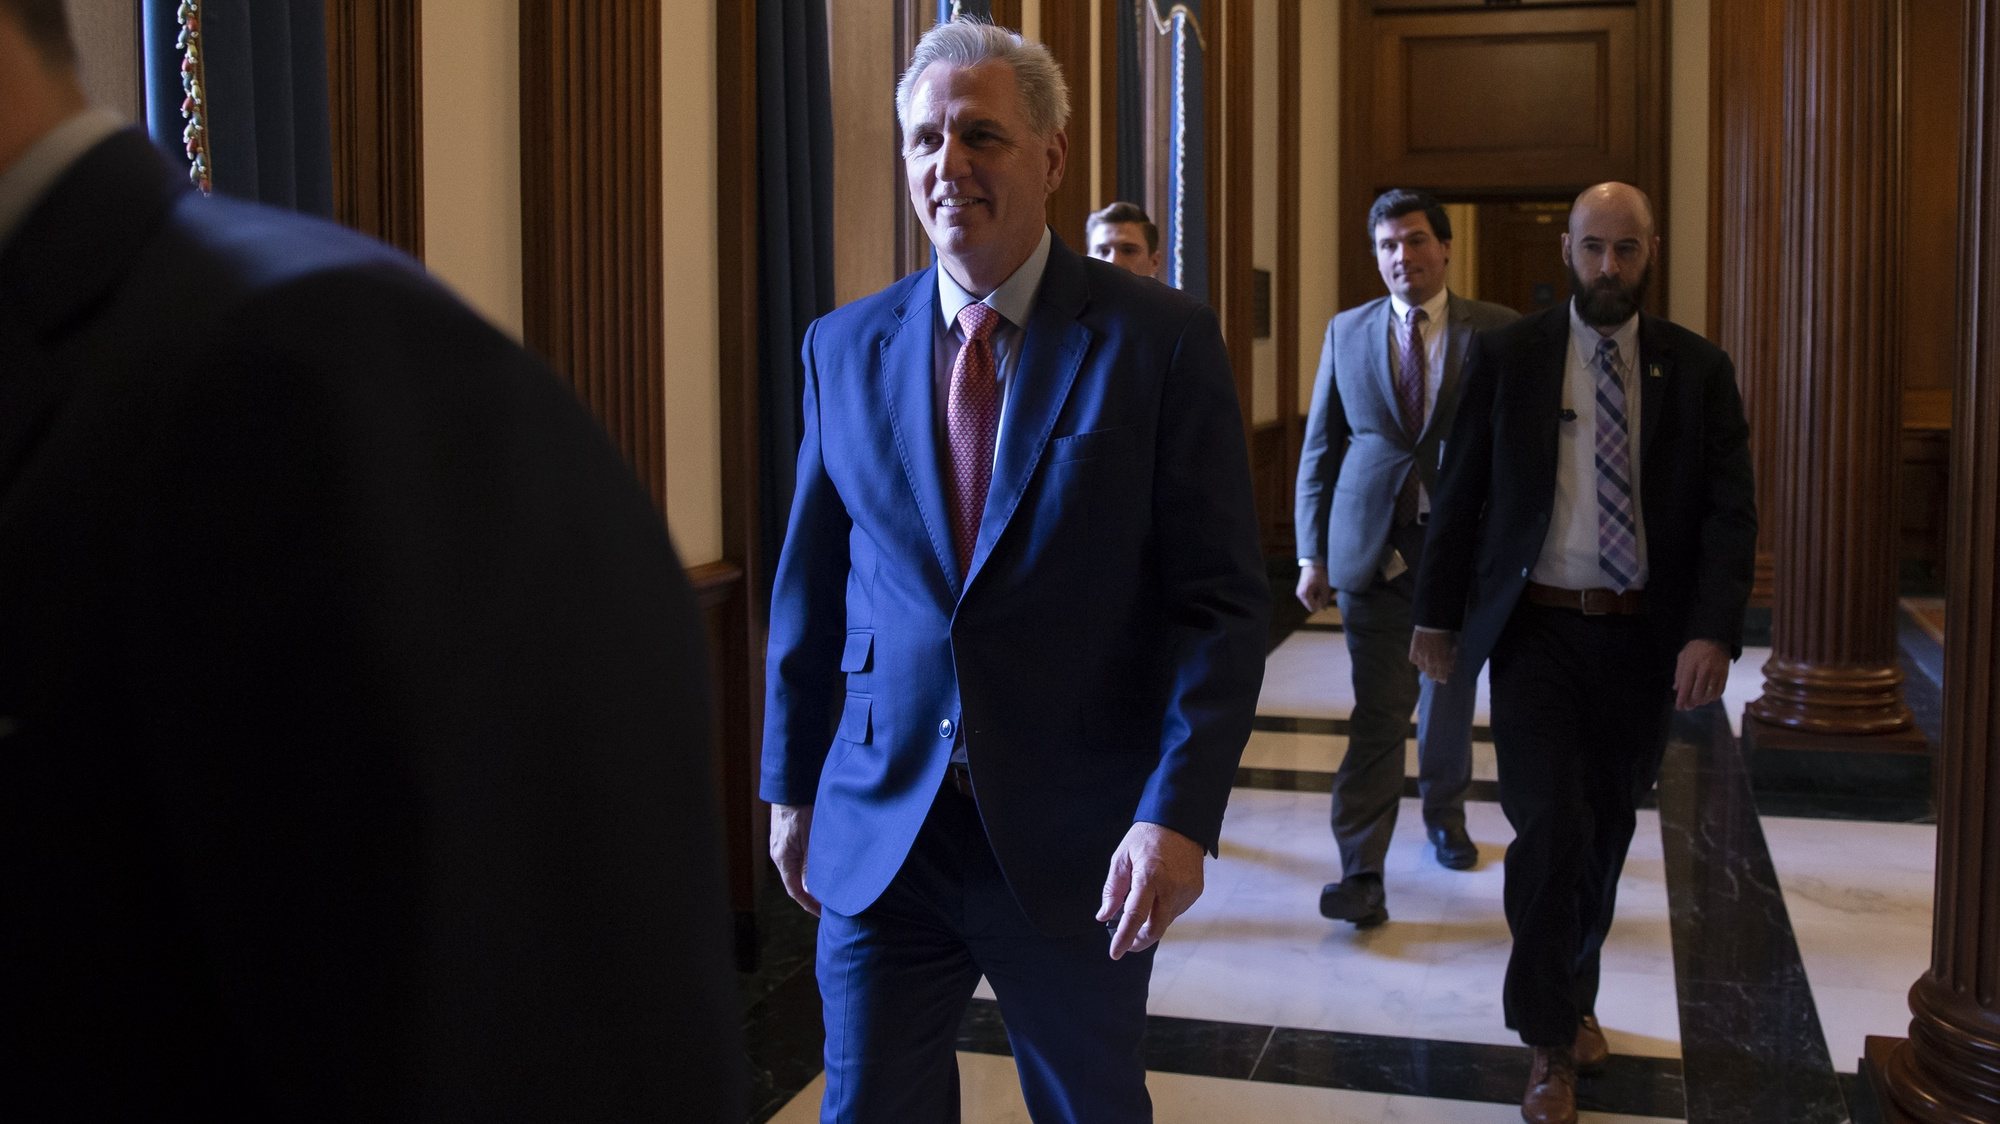 epa10377347 US House Minority Leader Kevin McCarthy (C) walks from the US House chamber to his office as the House works on the omnibus bill, on Capitol Hill in Washington, DC, USA, 23 December 2022. Before leaving for Christmas, the US House of Representatives passed a 1.7 trillion USD omnibus package that funds the federal government for the full 2023 fiscal year, averting a partial shutdown of the federal government.  EPA/MICHAEL REYNOLDS